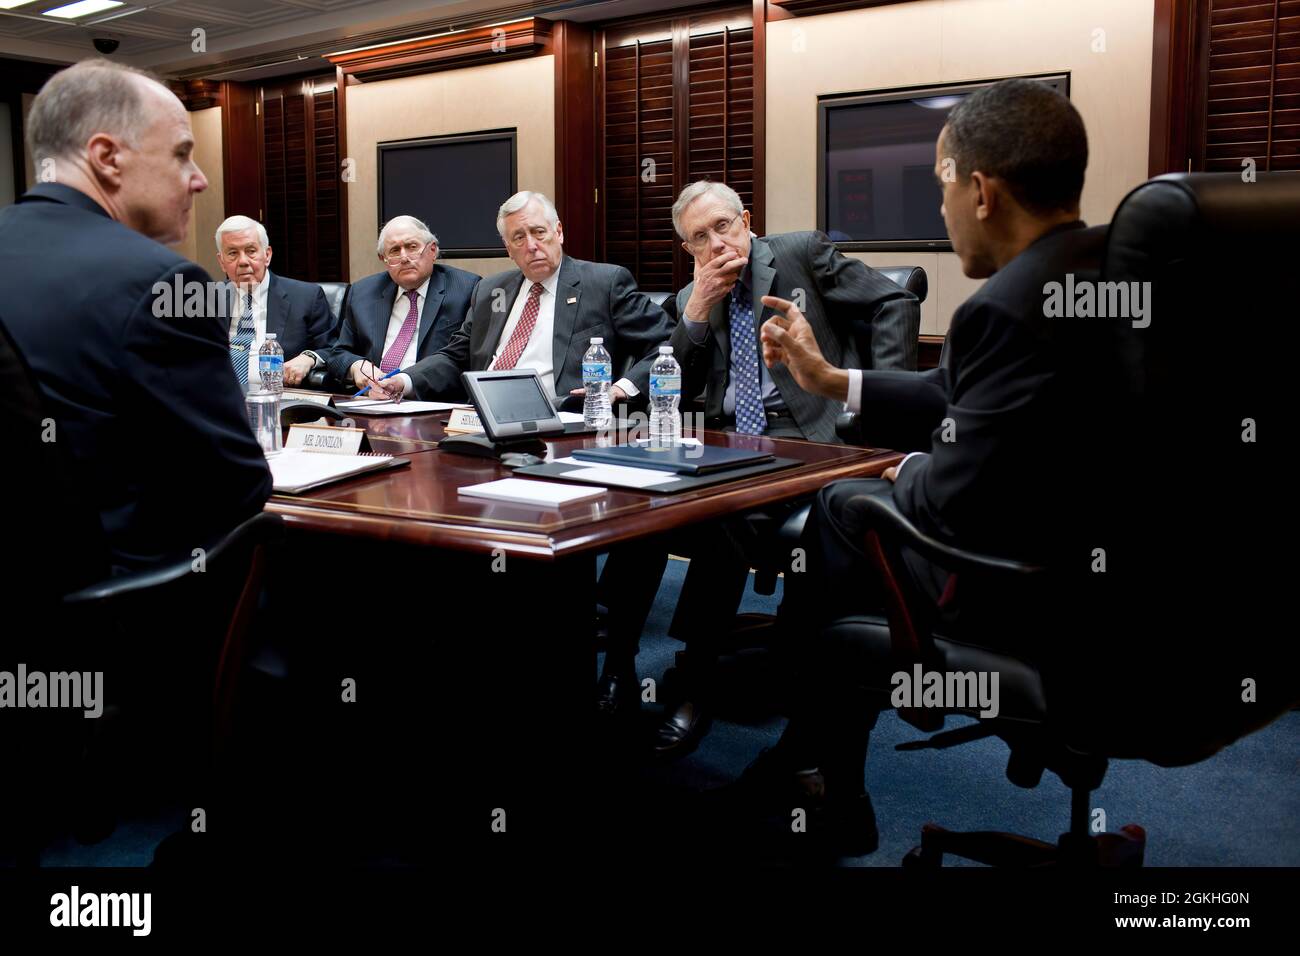 President Barack Obama meets with a bipartisan group of Congressional leaders on Libya in the Situation Room of the White House, March 18, 2011. Seated, from left, are: National Security Advisor Tom Donilon, Sen. Richard Lugar, R-Ind., Sen. Carl Levin, D-Mich., Rep. Steny Hoyer, D-Md., and Senate Majority Leader Harry Reid, D-Nev. (Official White House Photo by Pete Souza) This official White House photograph is being made available only for publication by news organizations and/or for personal use printing by the subject(s) of the photograph. The photograph may not be manipulated in any way a Stock Photo